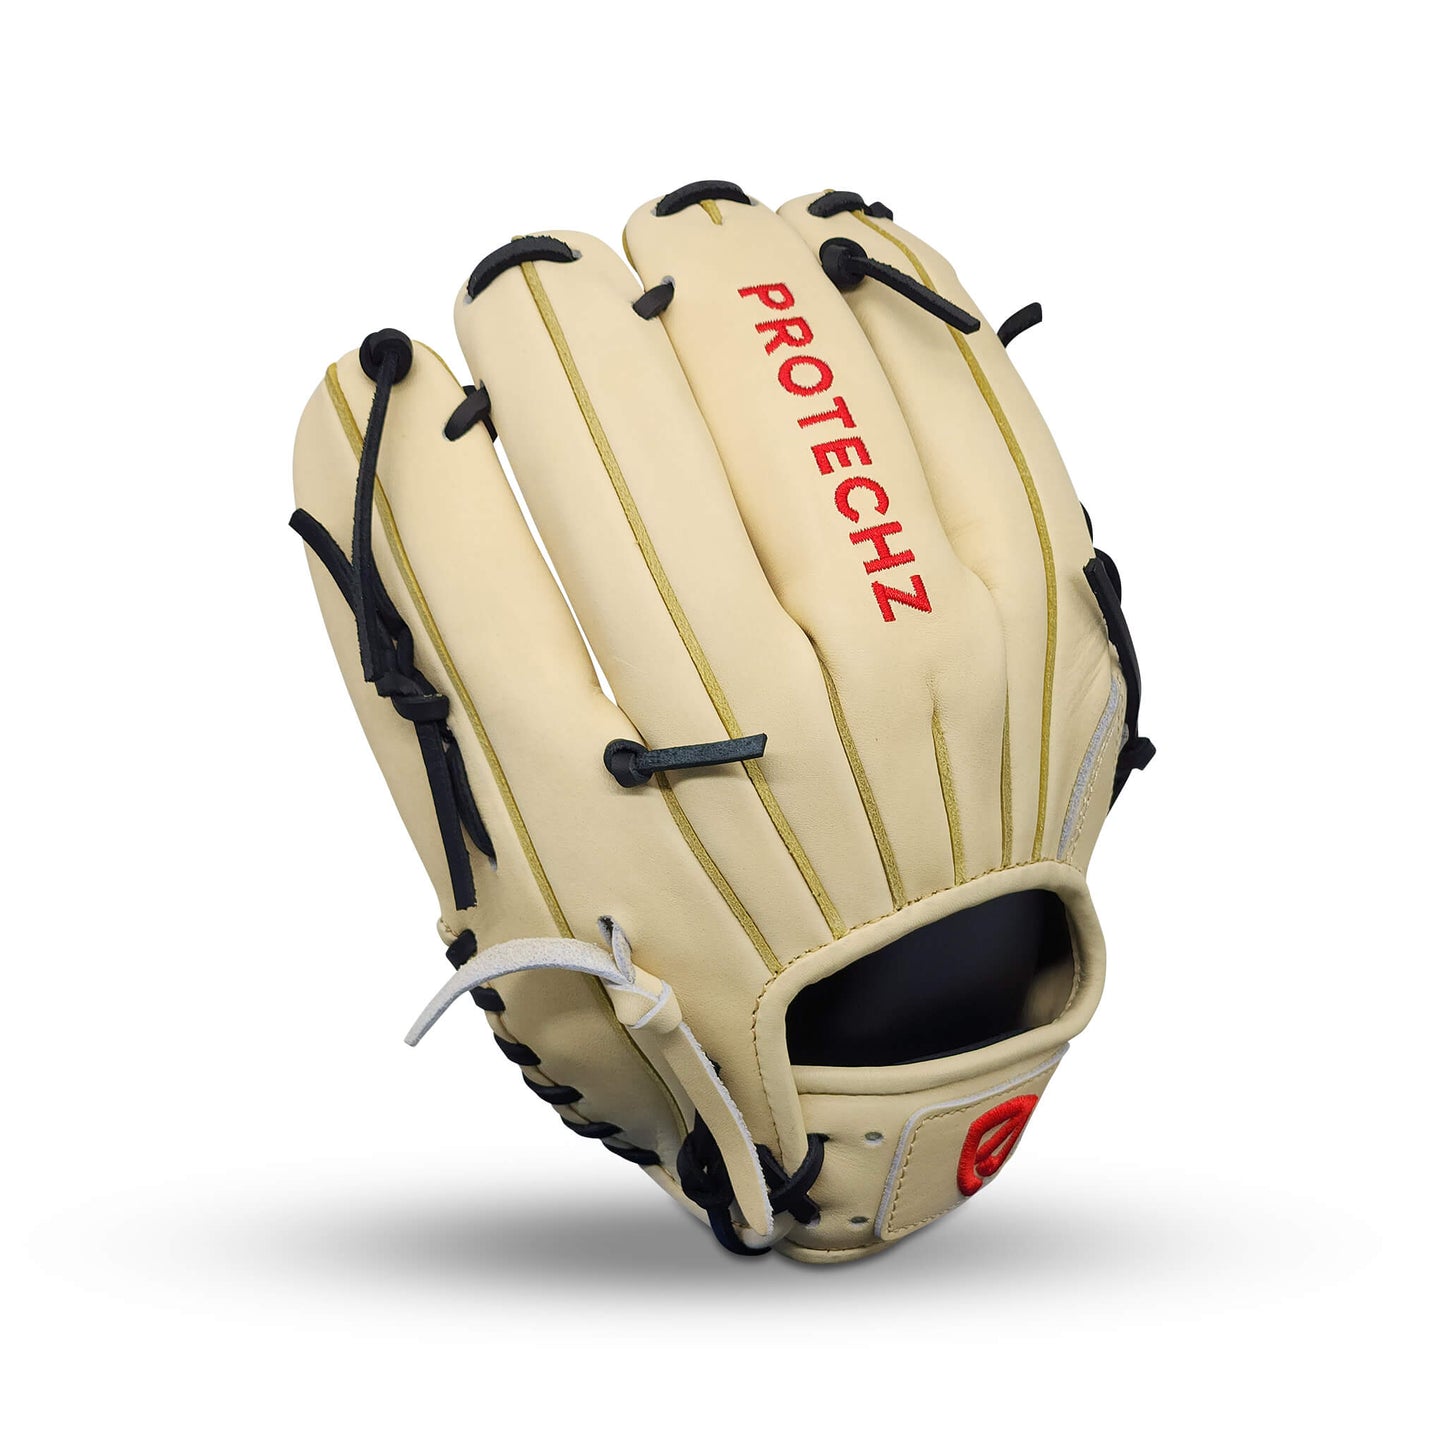 Titan Series Limited Edition 11.75” Infield Glove with T-Web, Camel Shell and Palm, Black Lacing, and Embroidered Texas Flag – RHT